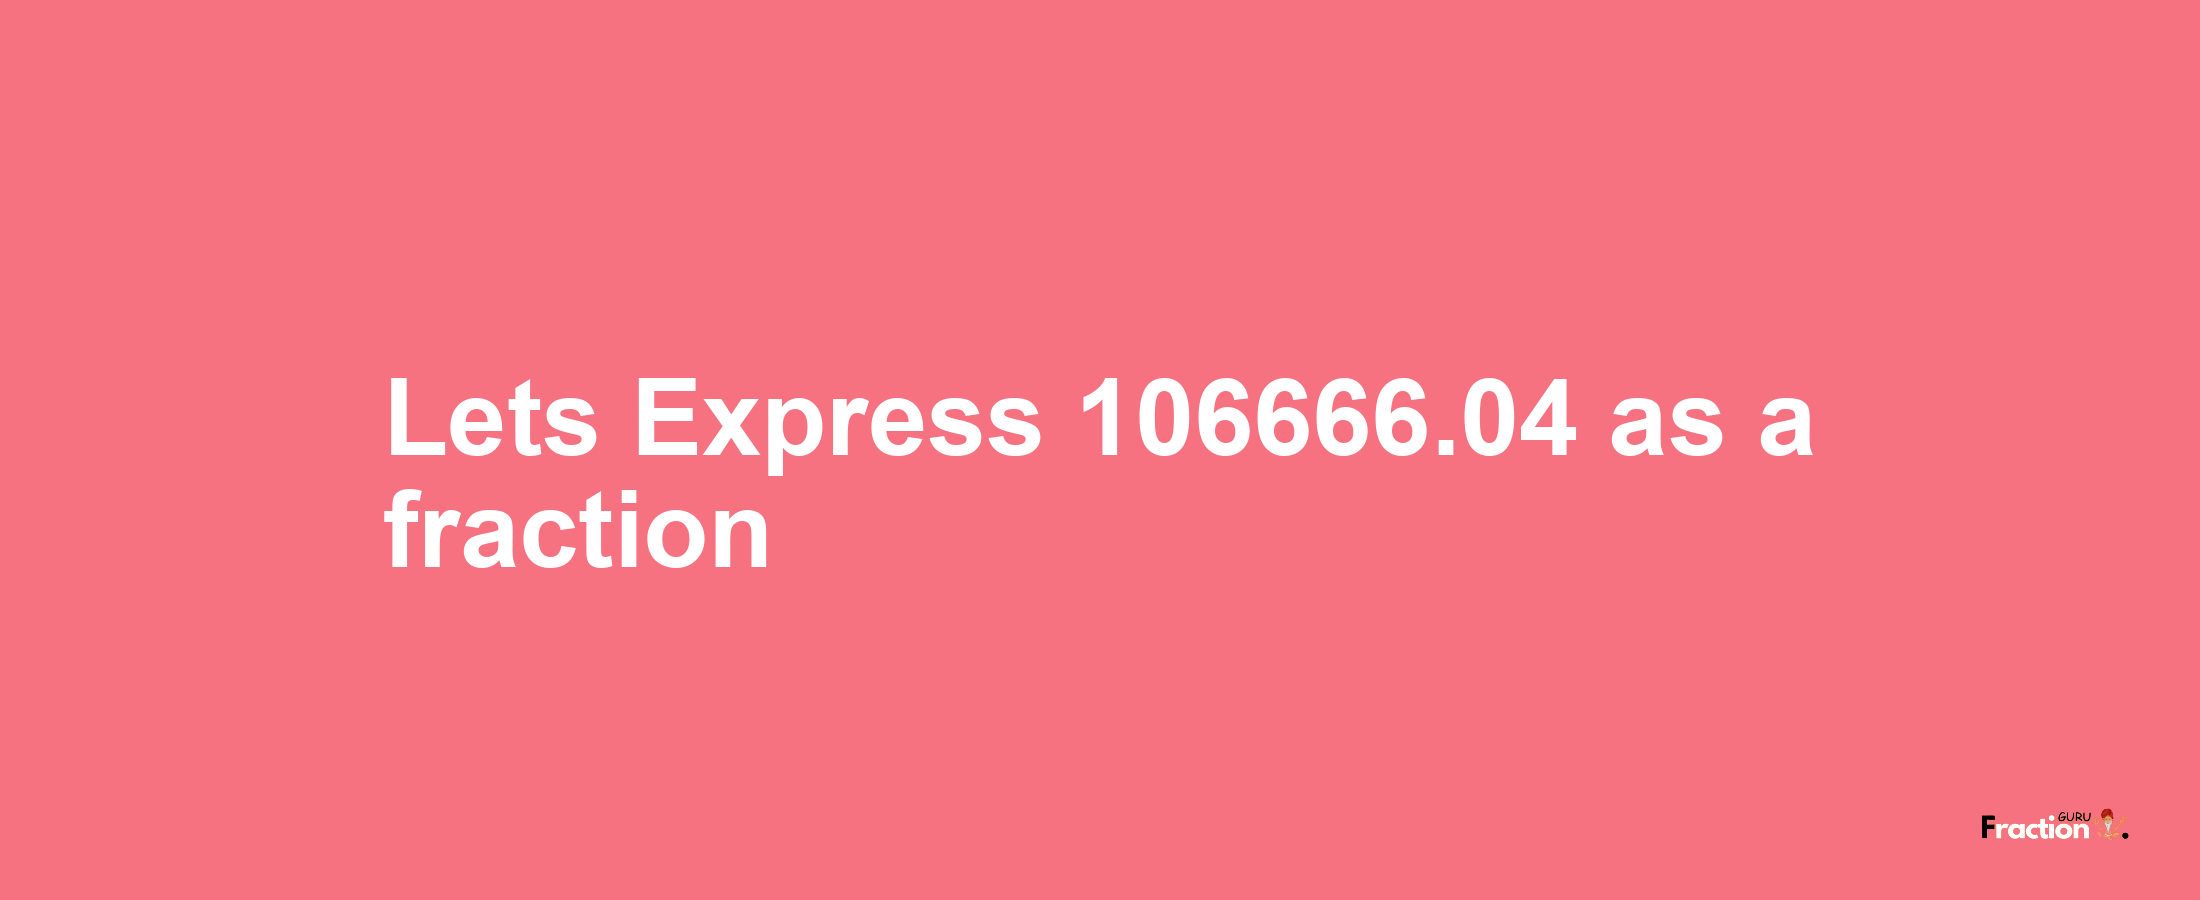 Lets Express 106666.04 as afraction